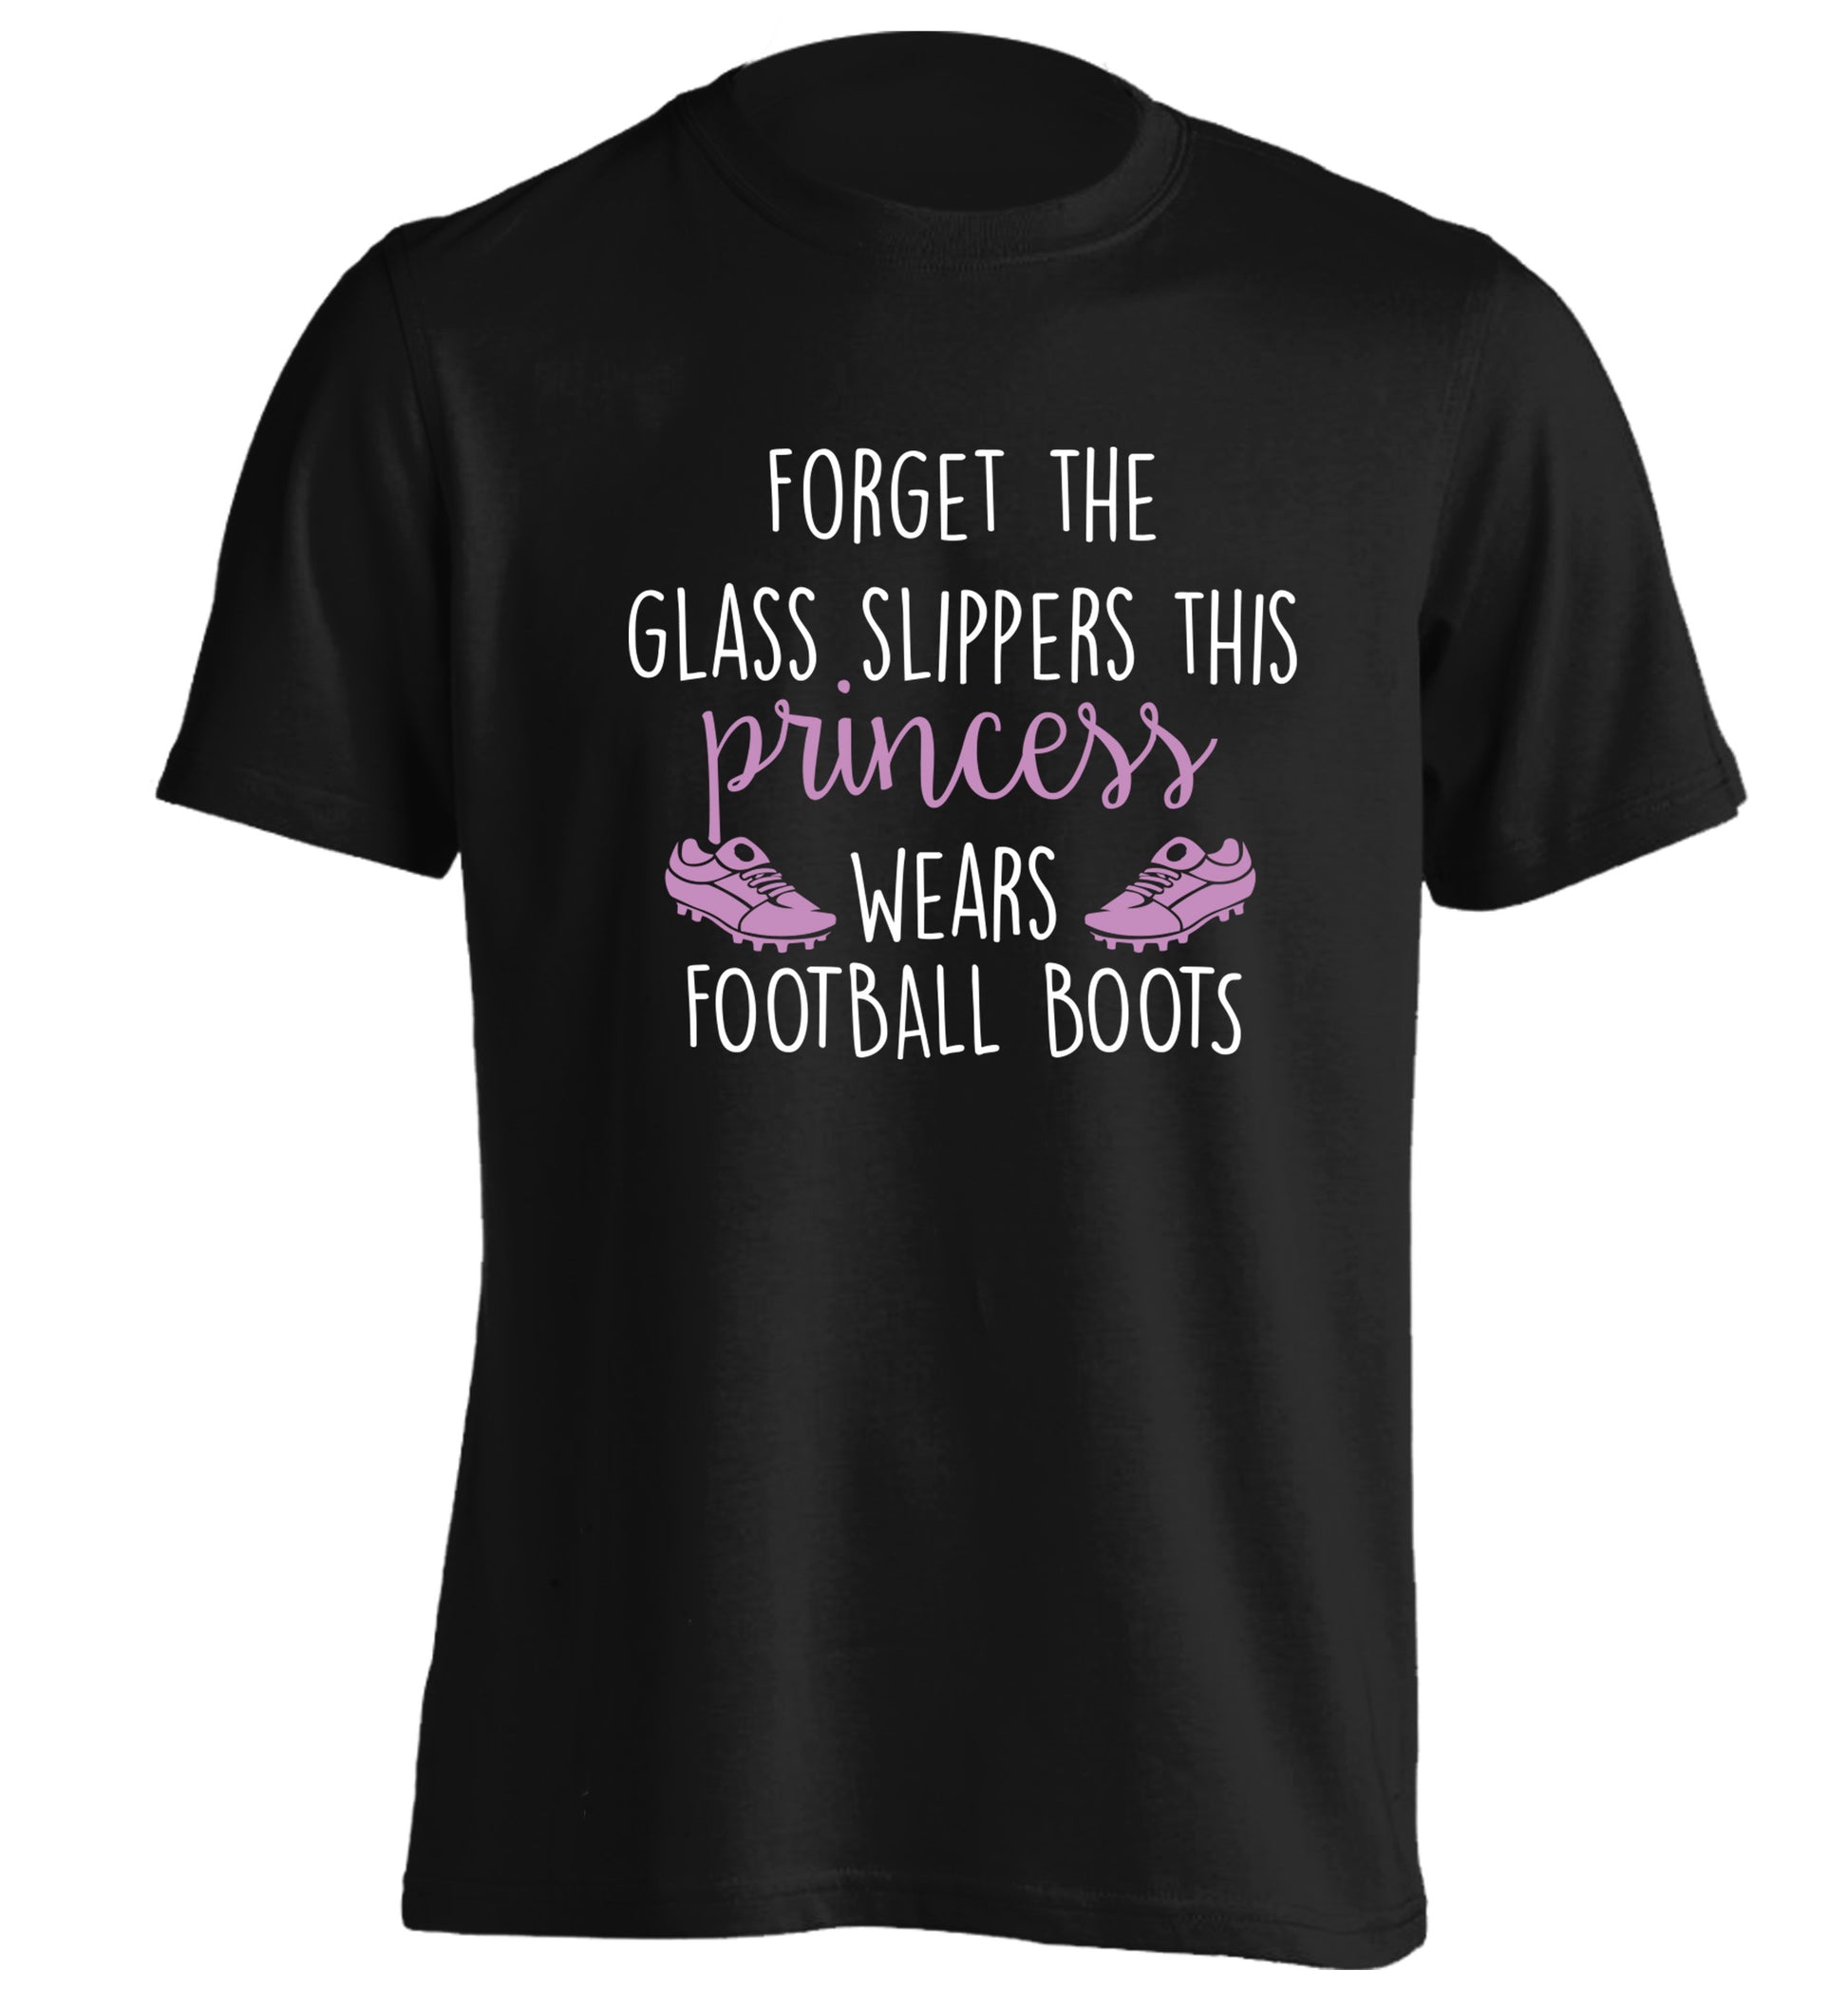 Forget the glass slippers this princess wears football boots adults unisex black Tshirt 2XL